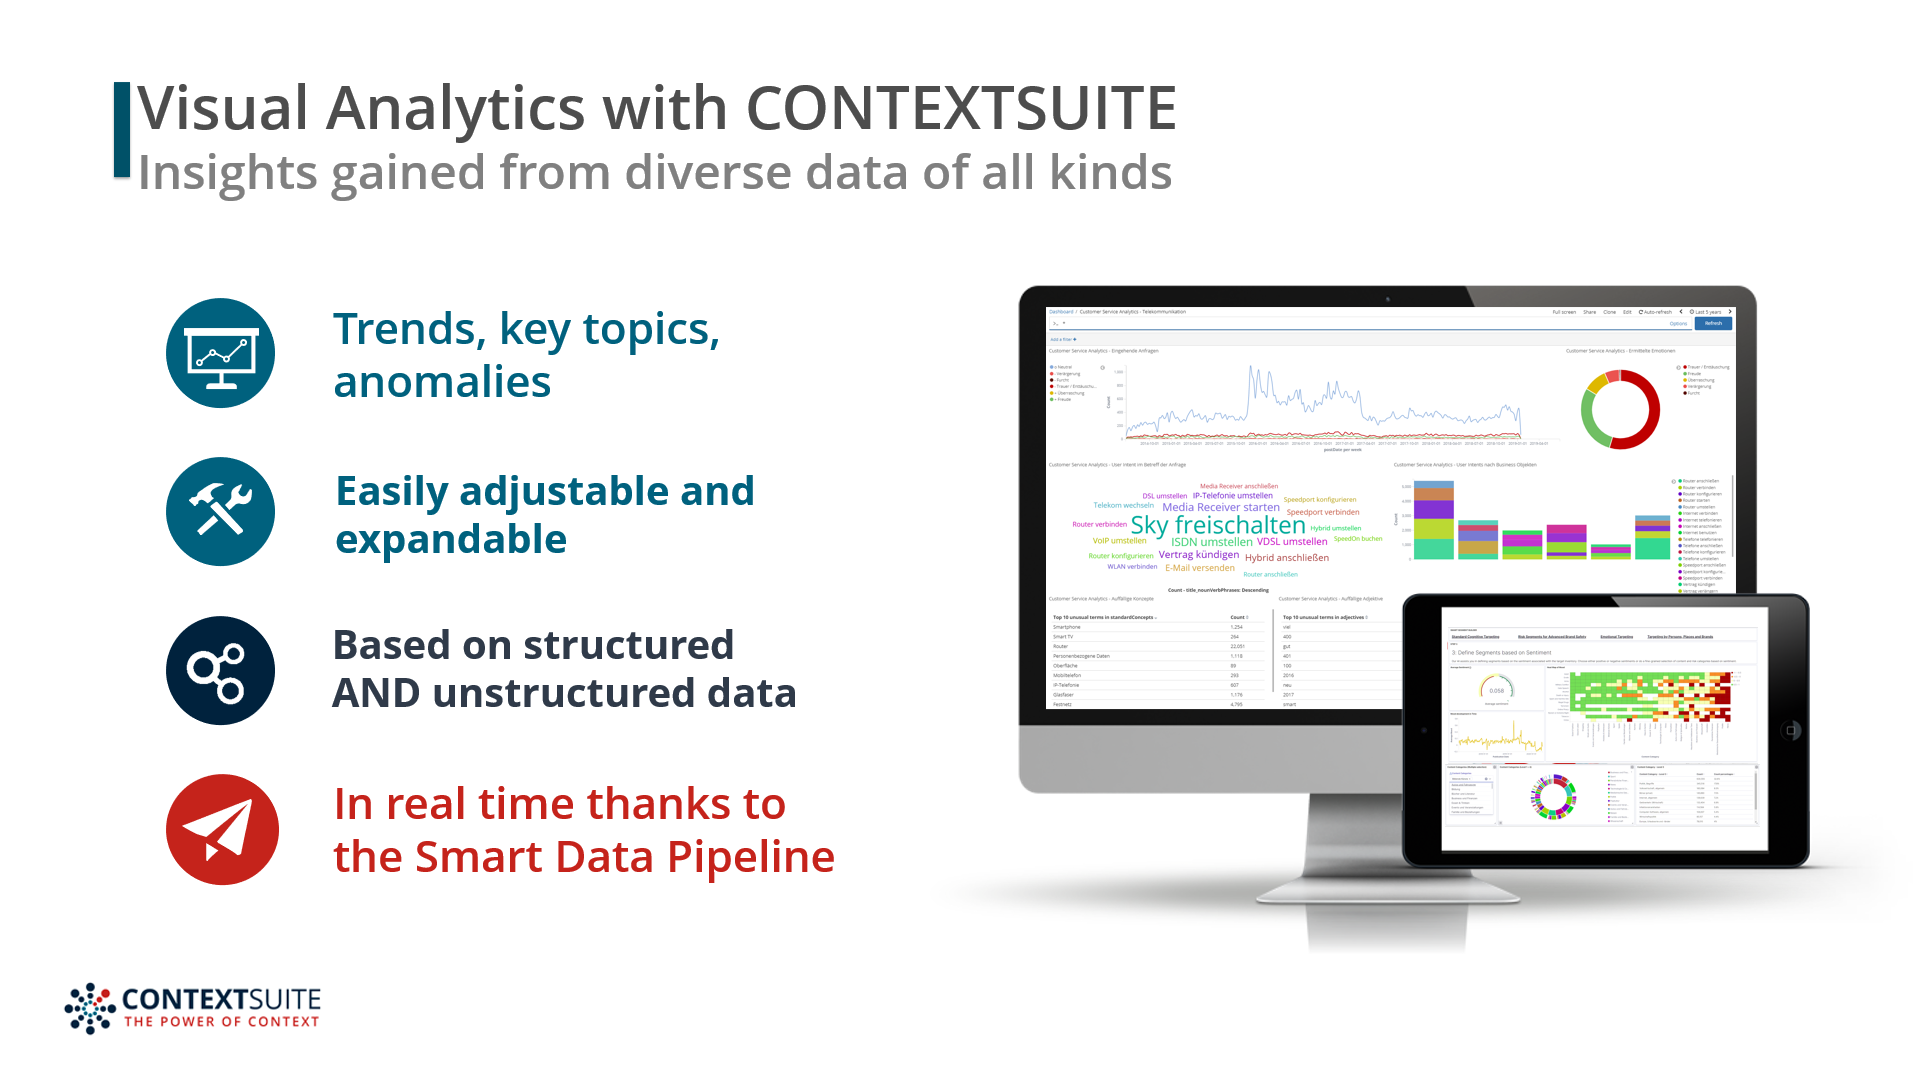 Visual Analytics with CONTEXTSUITE: Insights from distributed data of all kinds (structured & unstructured). Instant insides into trends, key topics and conspicuities. In real time.